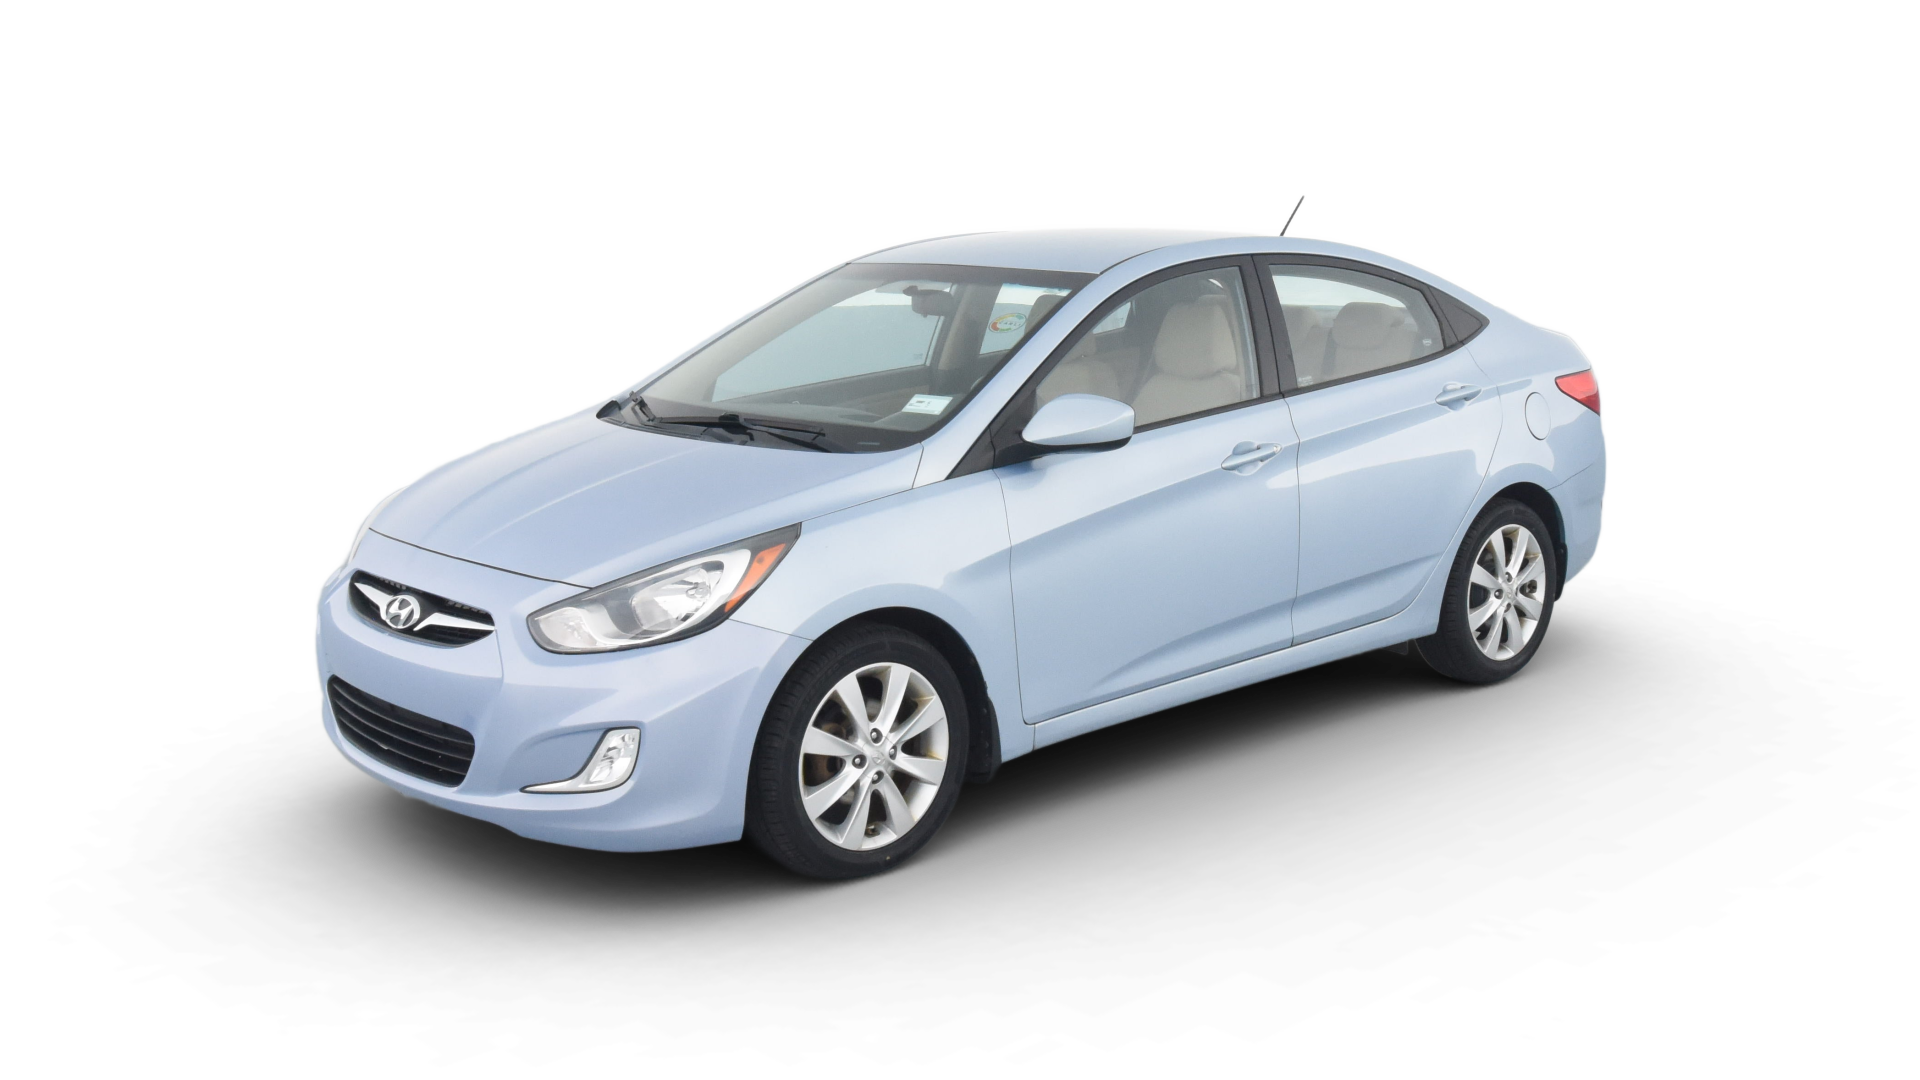 Used 2013 Hyundai Accent For Sale Online | Carvana